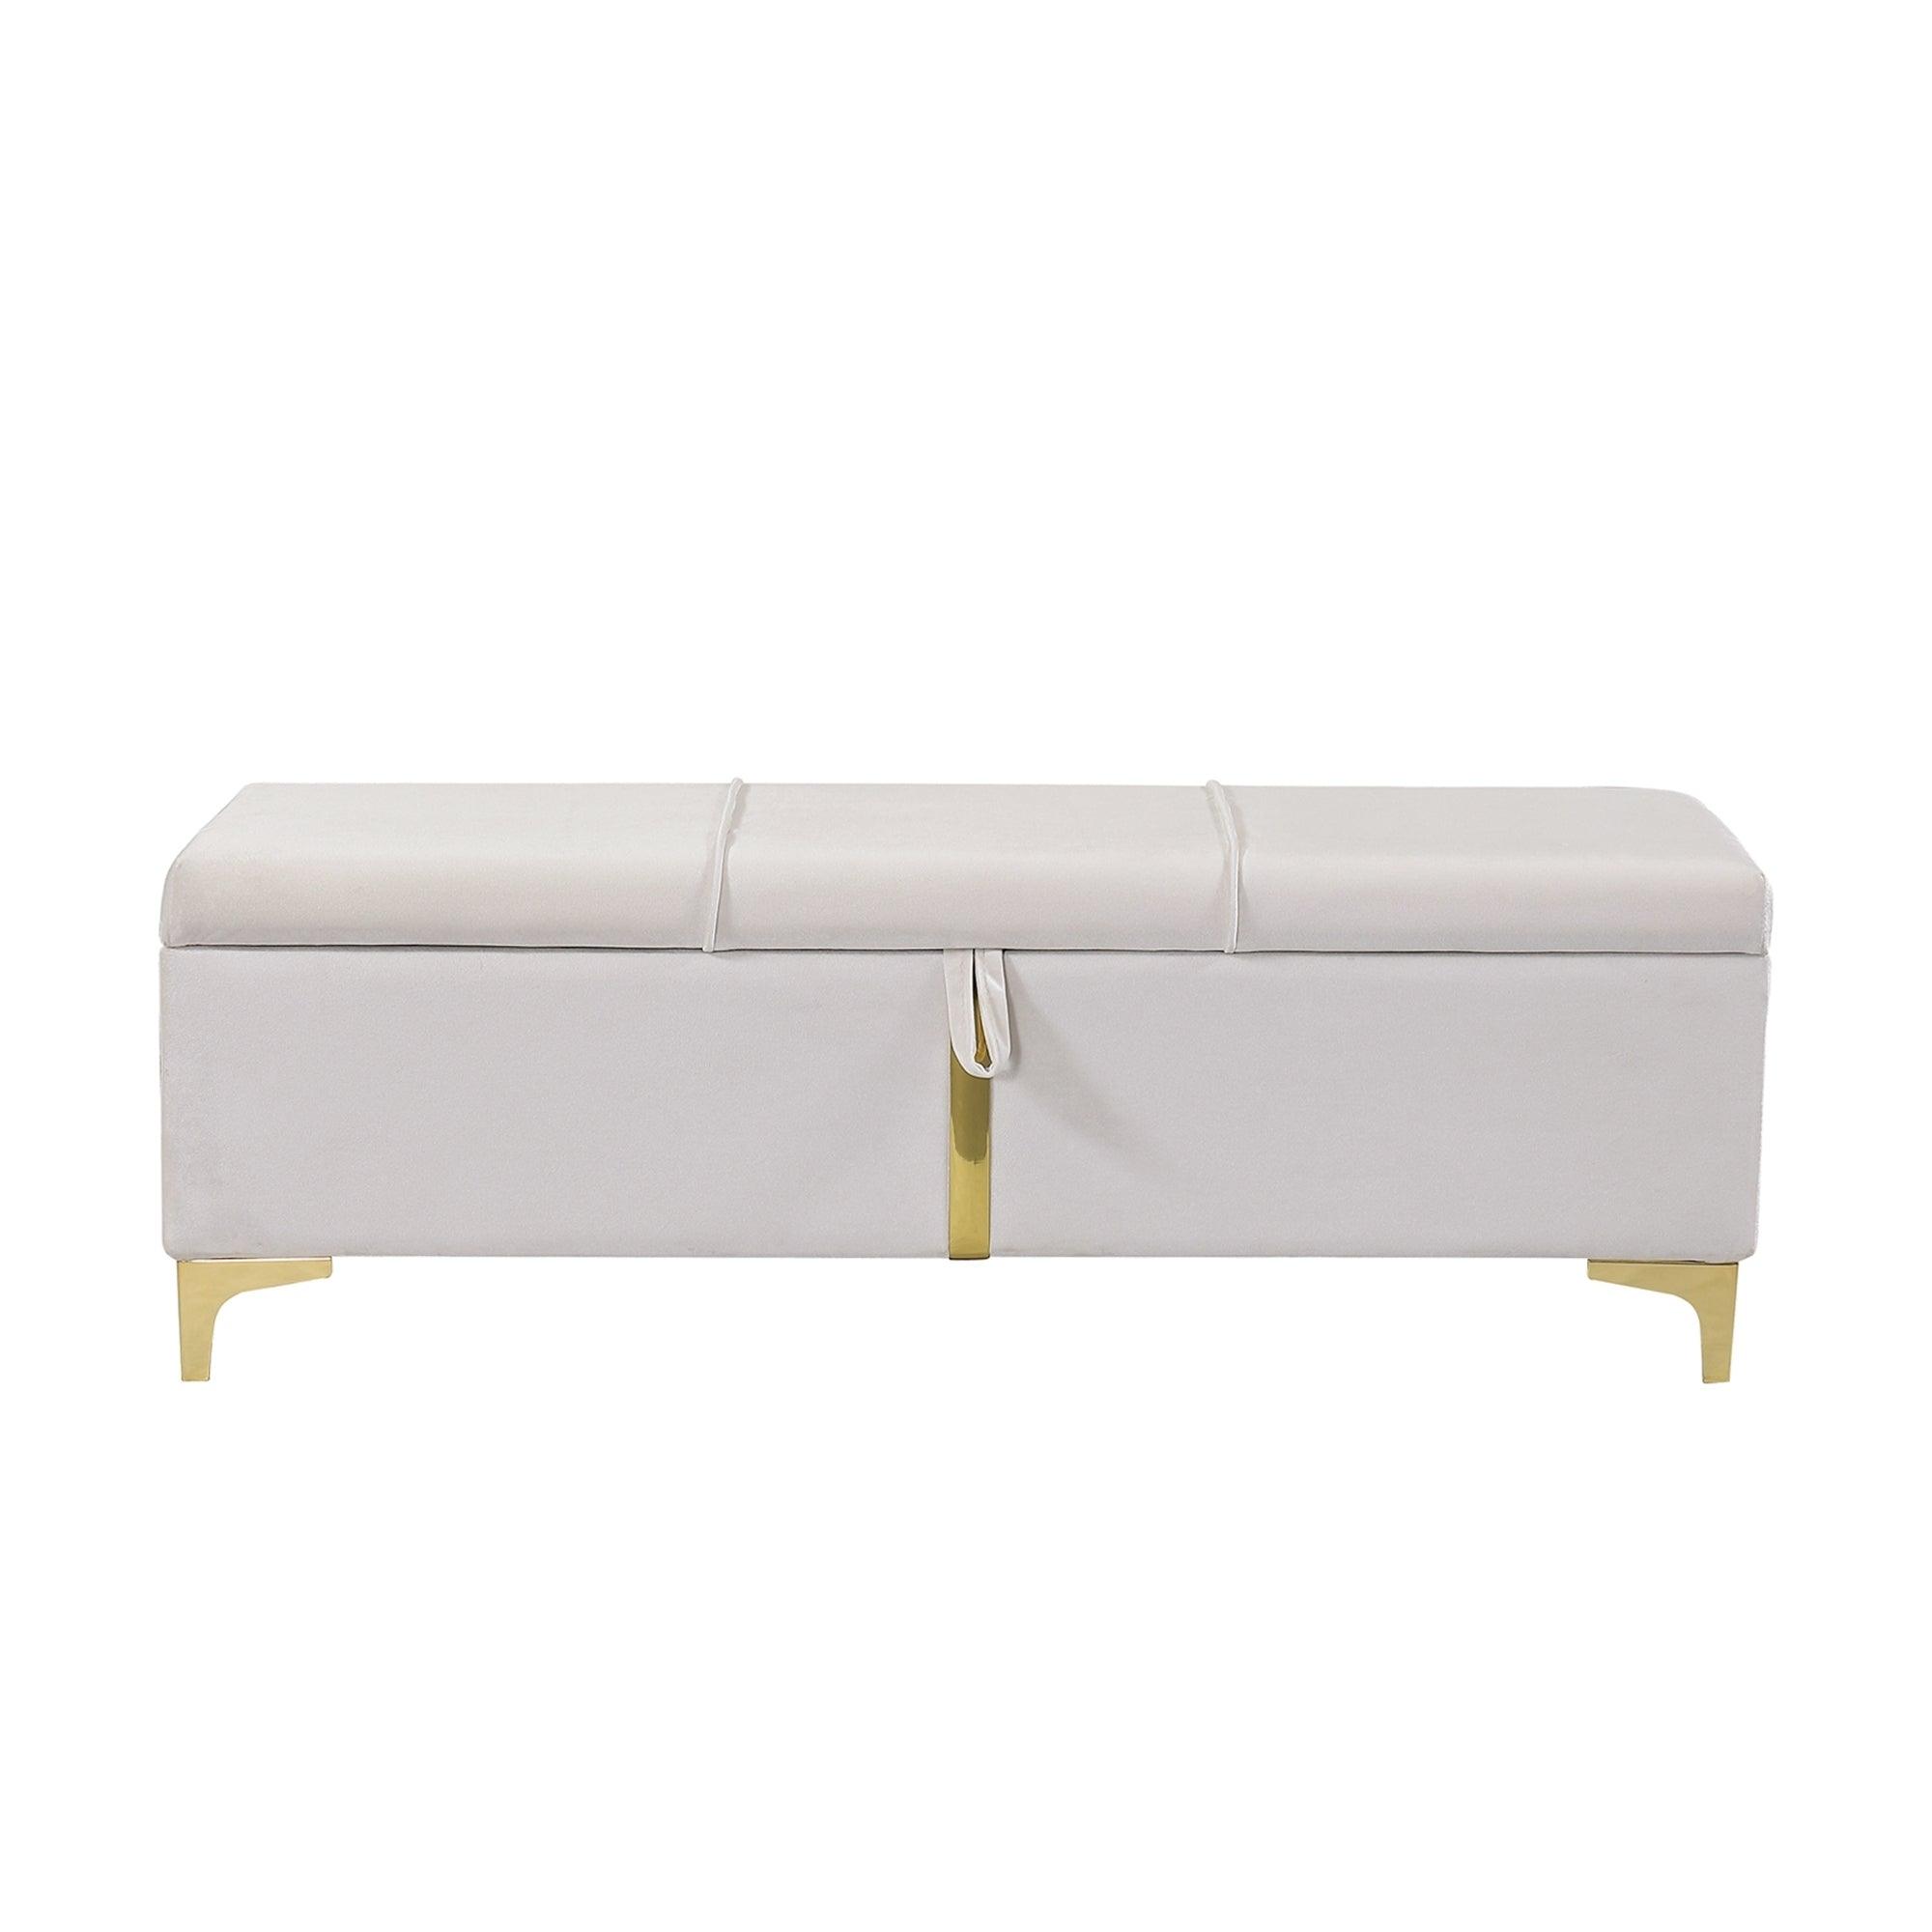 Elegant Upholstered Storage Ottoman, Storage Bench With Metal Legs For Bedroom, Living Room, Fully Assembled Except Legs, Beige